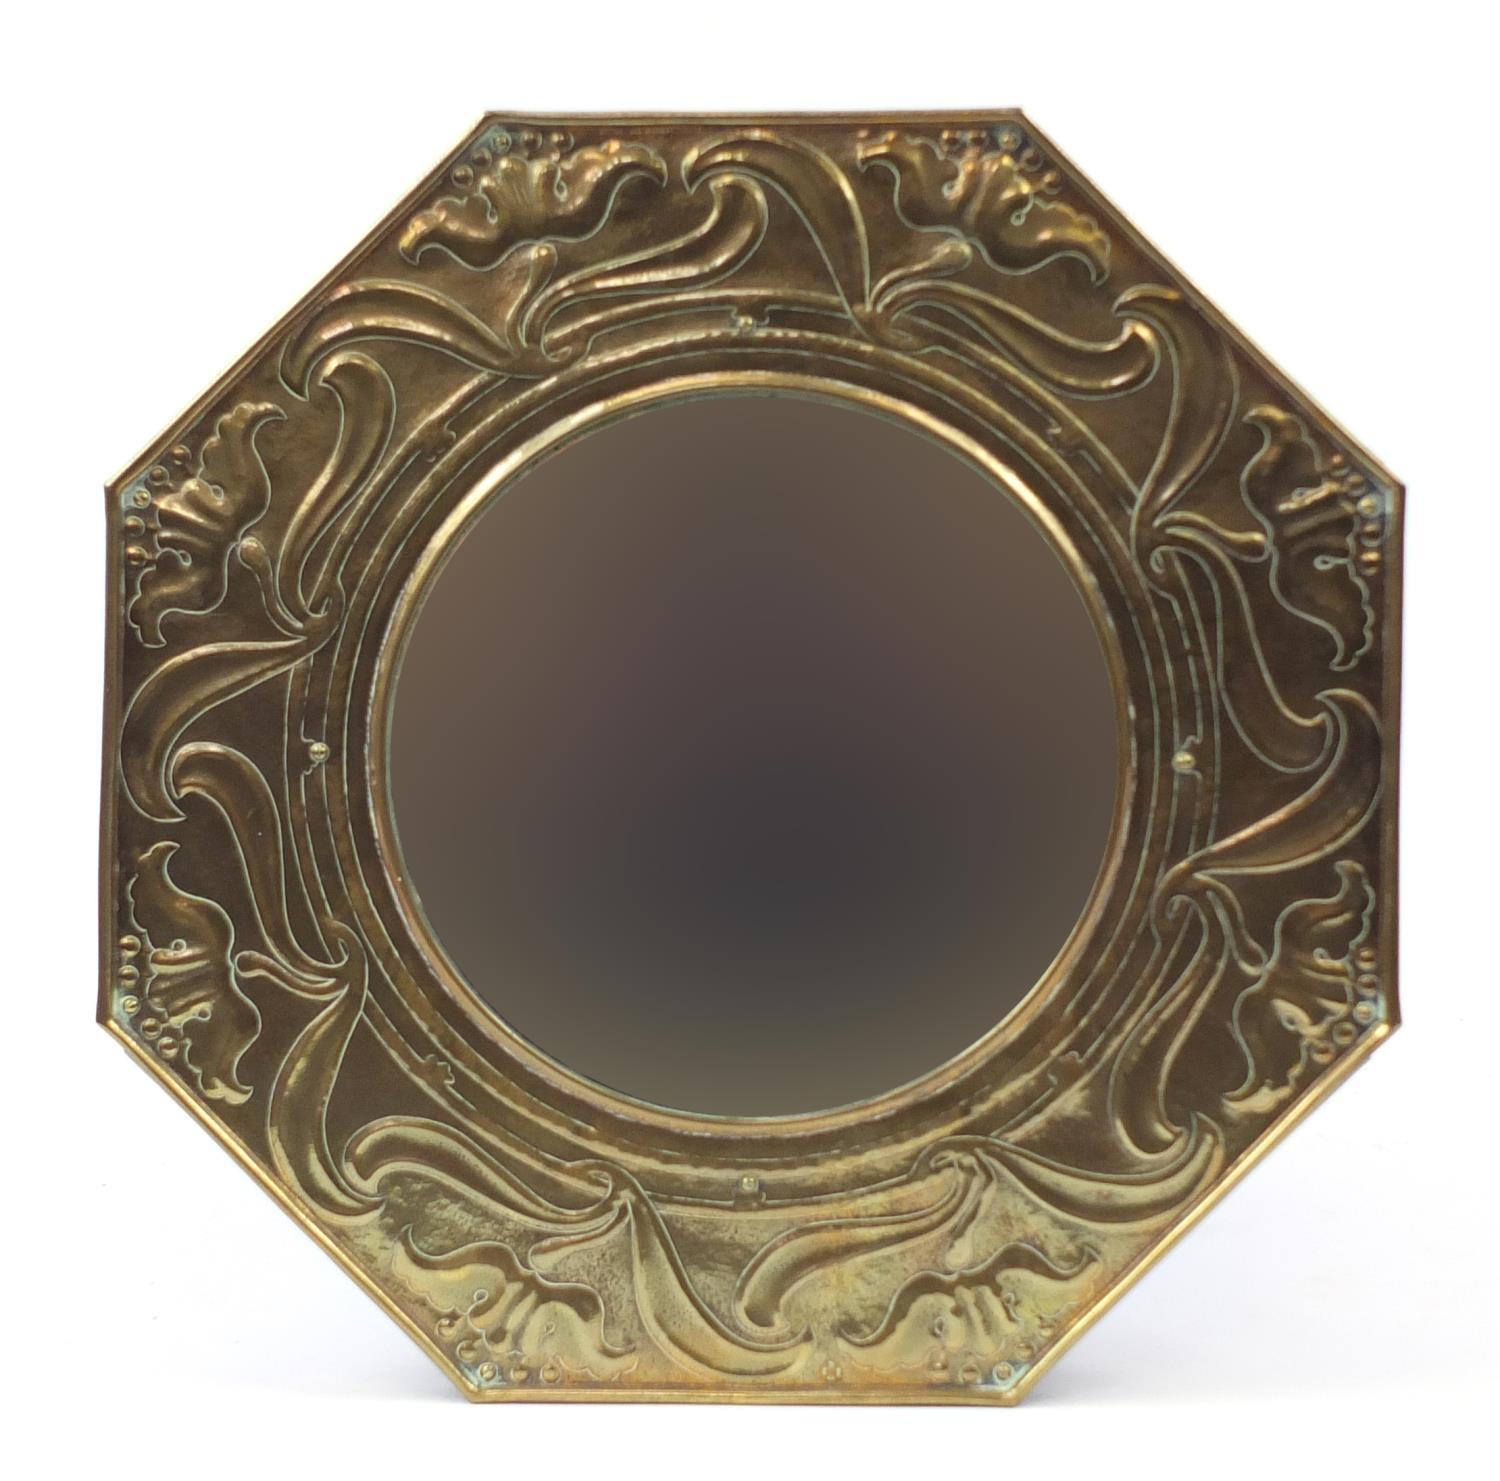 Keswick School of Industrial Arts, Arts & Crafts octagonal brass mirror embossed with stylised